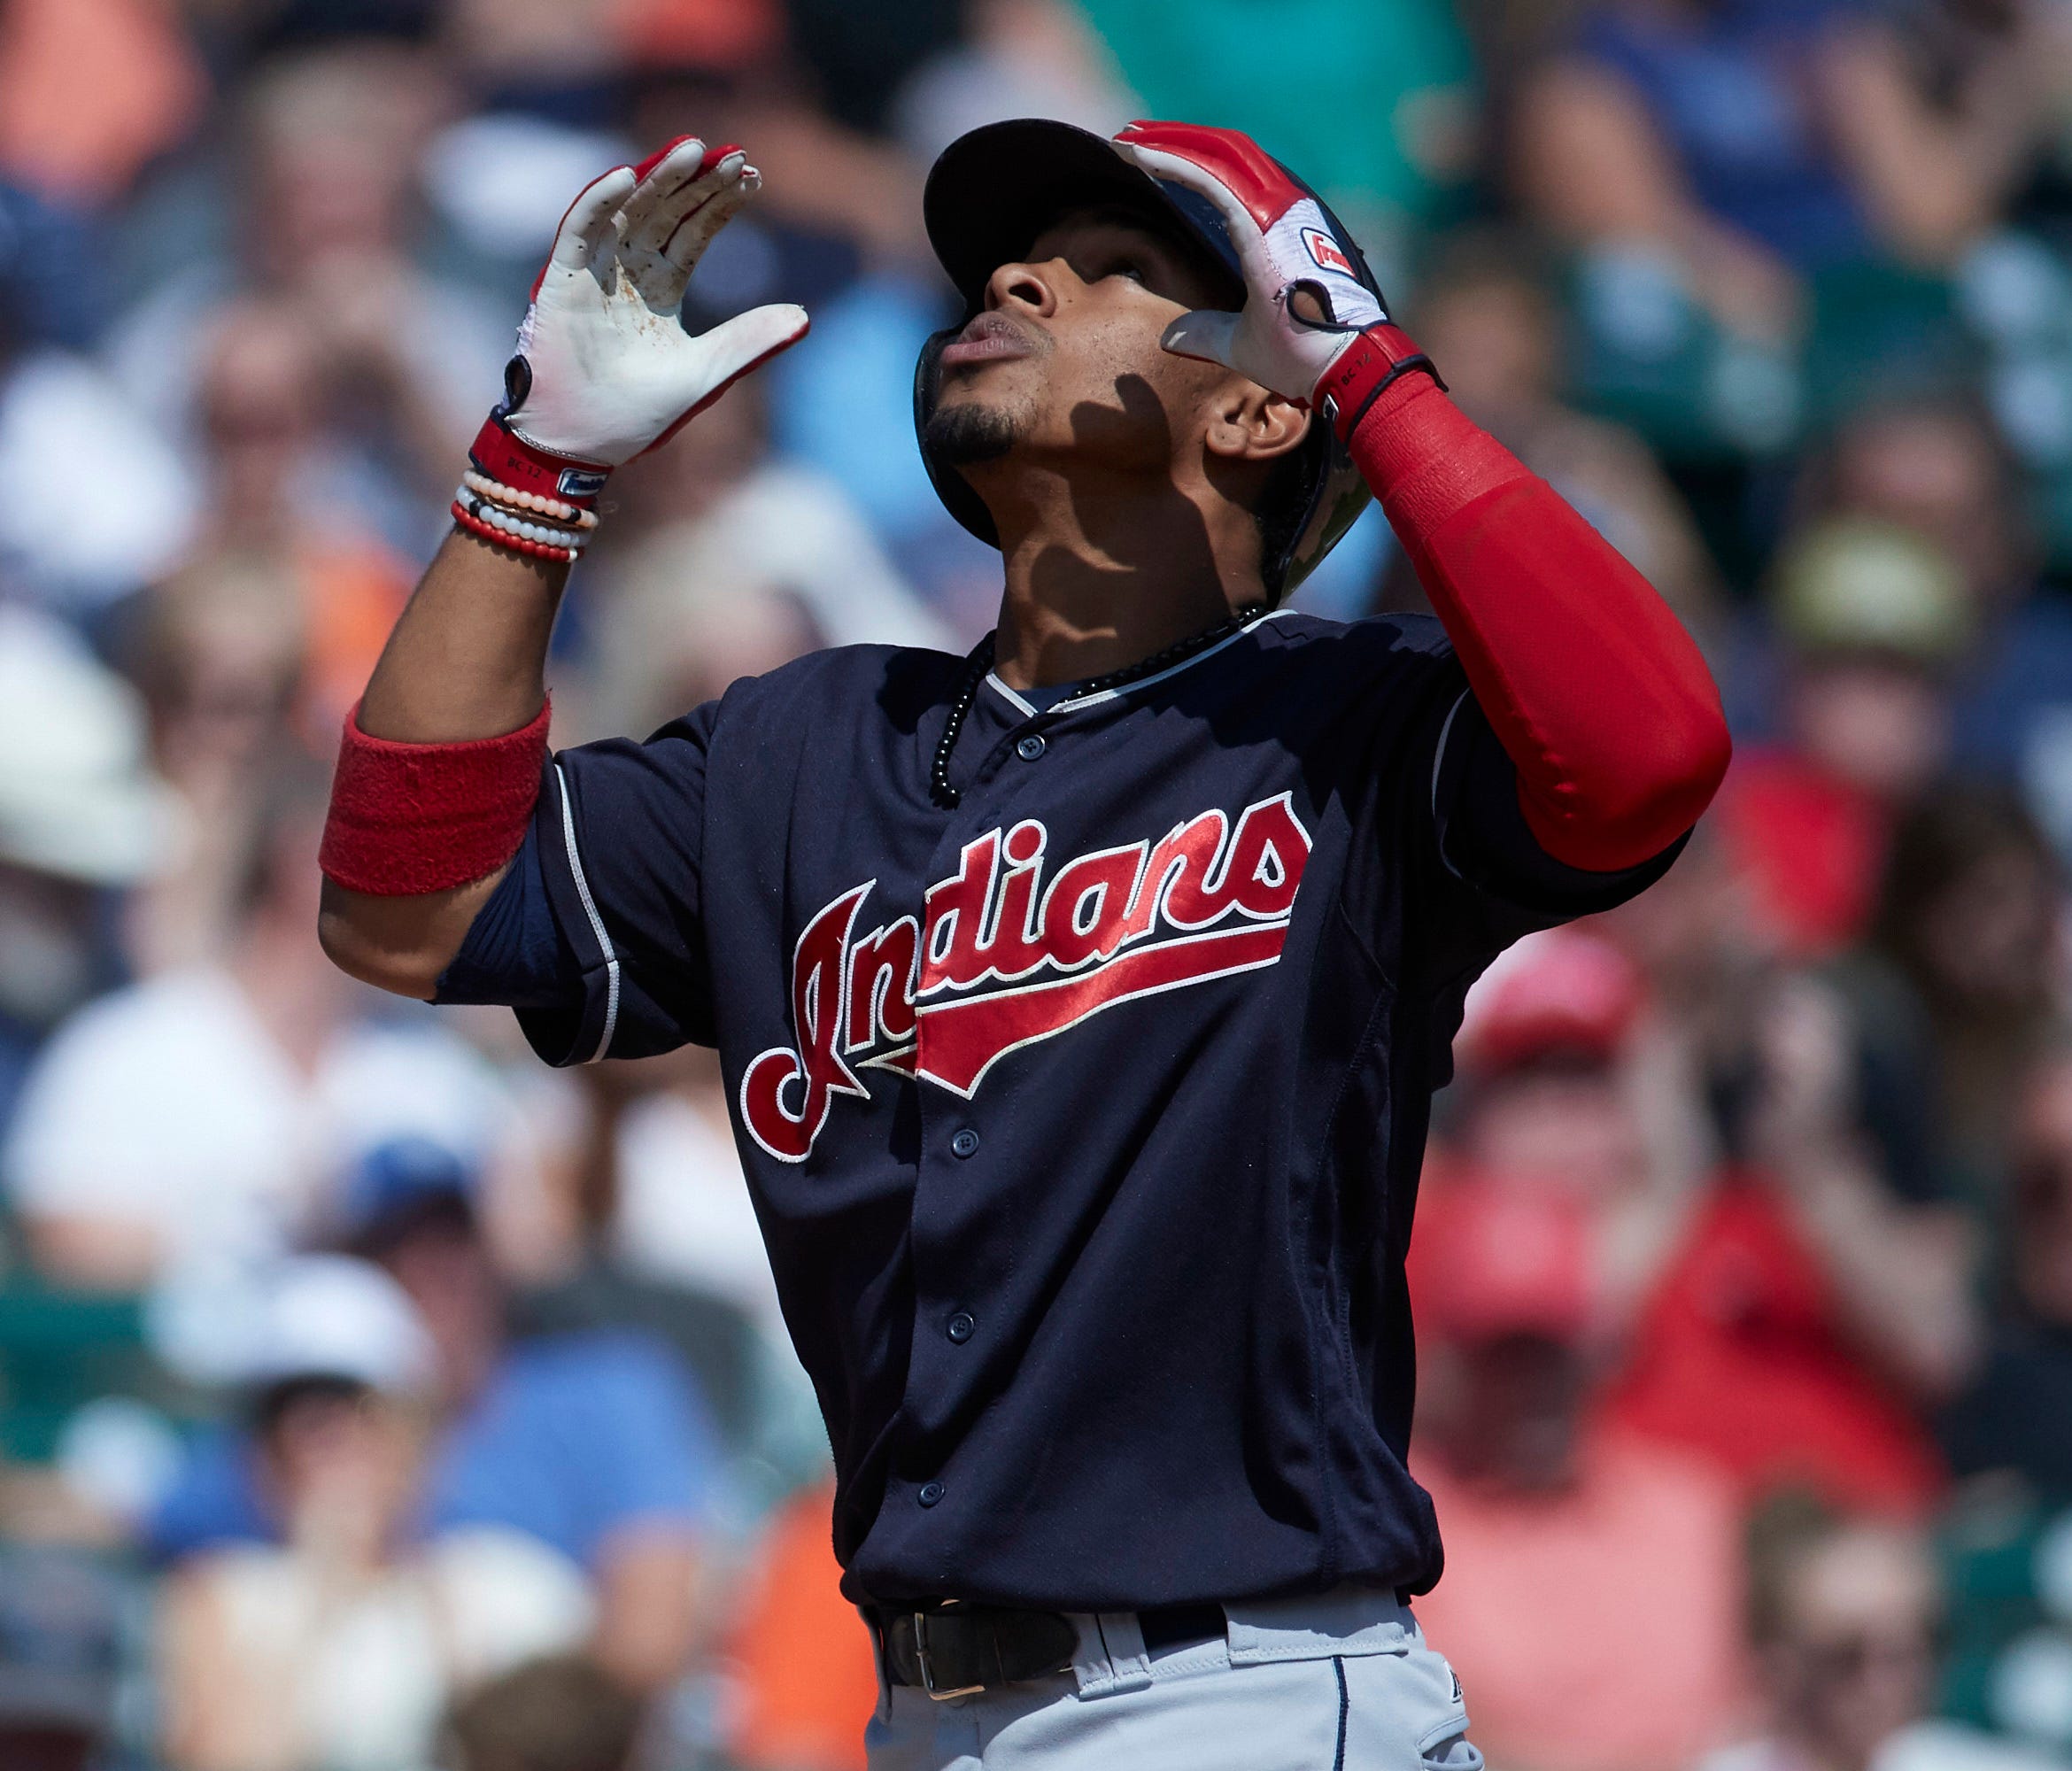 Francisco Lindor celebrates after he hits a home run.